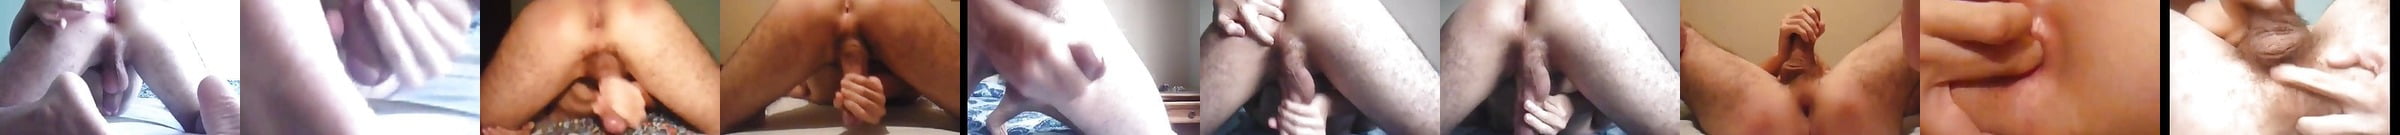 Ass Up Male Orgasm Contractions Cumshot 4 50 Gay Porn 98 Xhamster